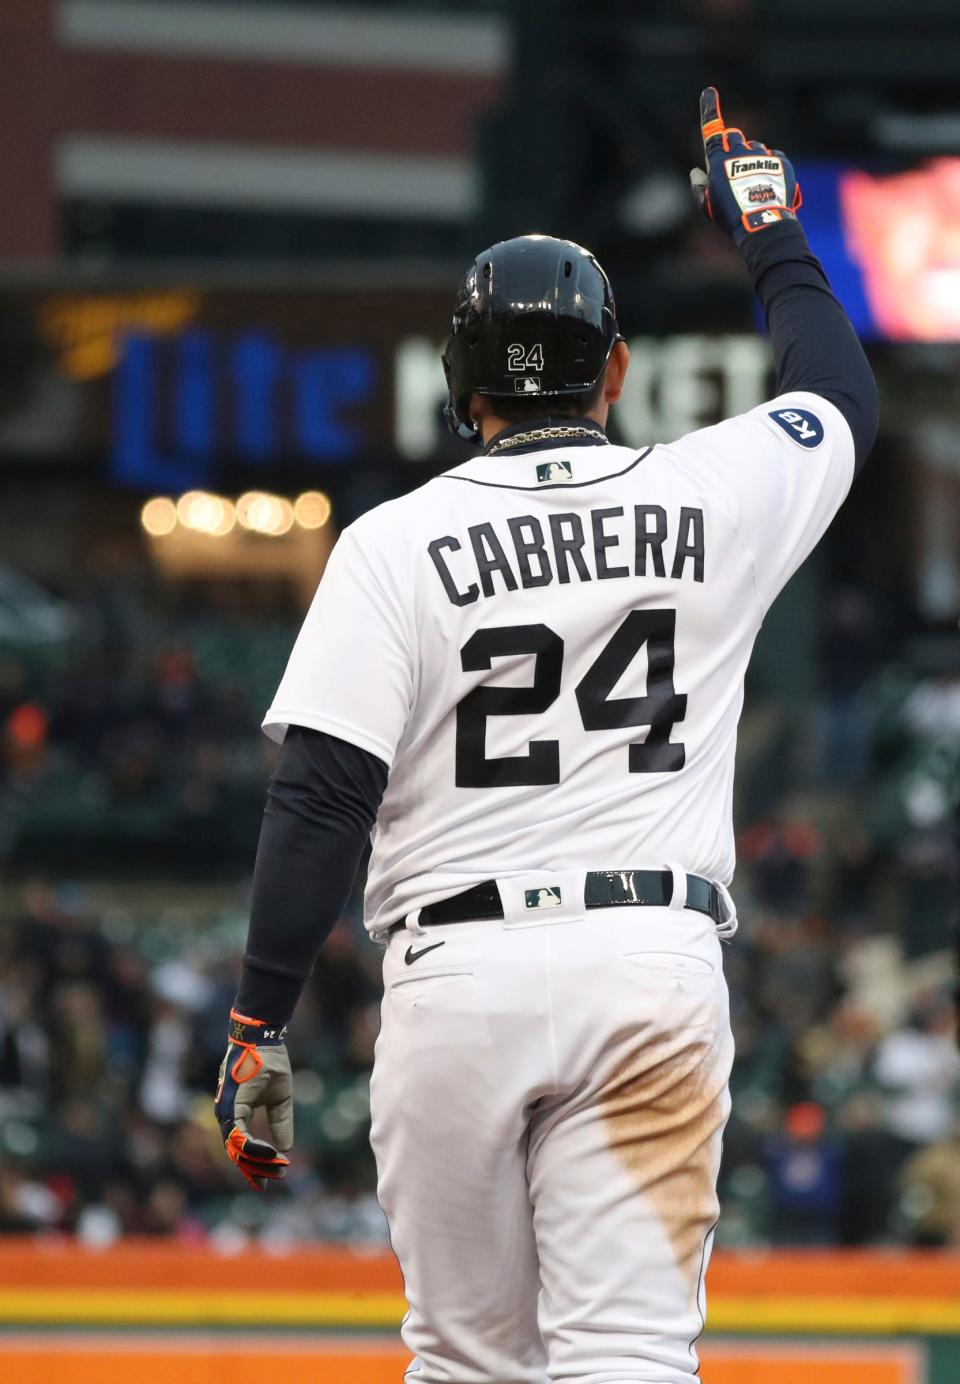 Tigers DH Miguel Cabrera after his single against Yankees pitcher Luis Severino during the fourth inning of the Tigers' 5-3 loss to the Yankees on Wednesday, April 20, 2022 at Comerica Park.